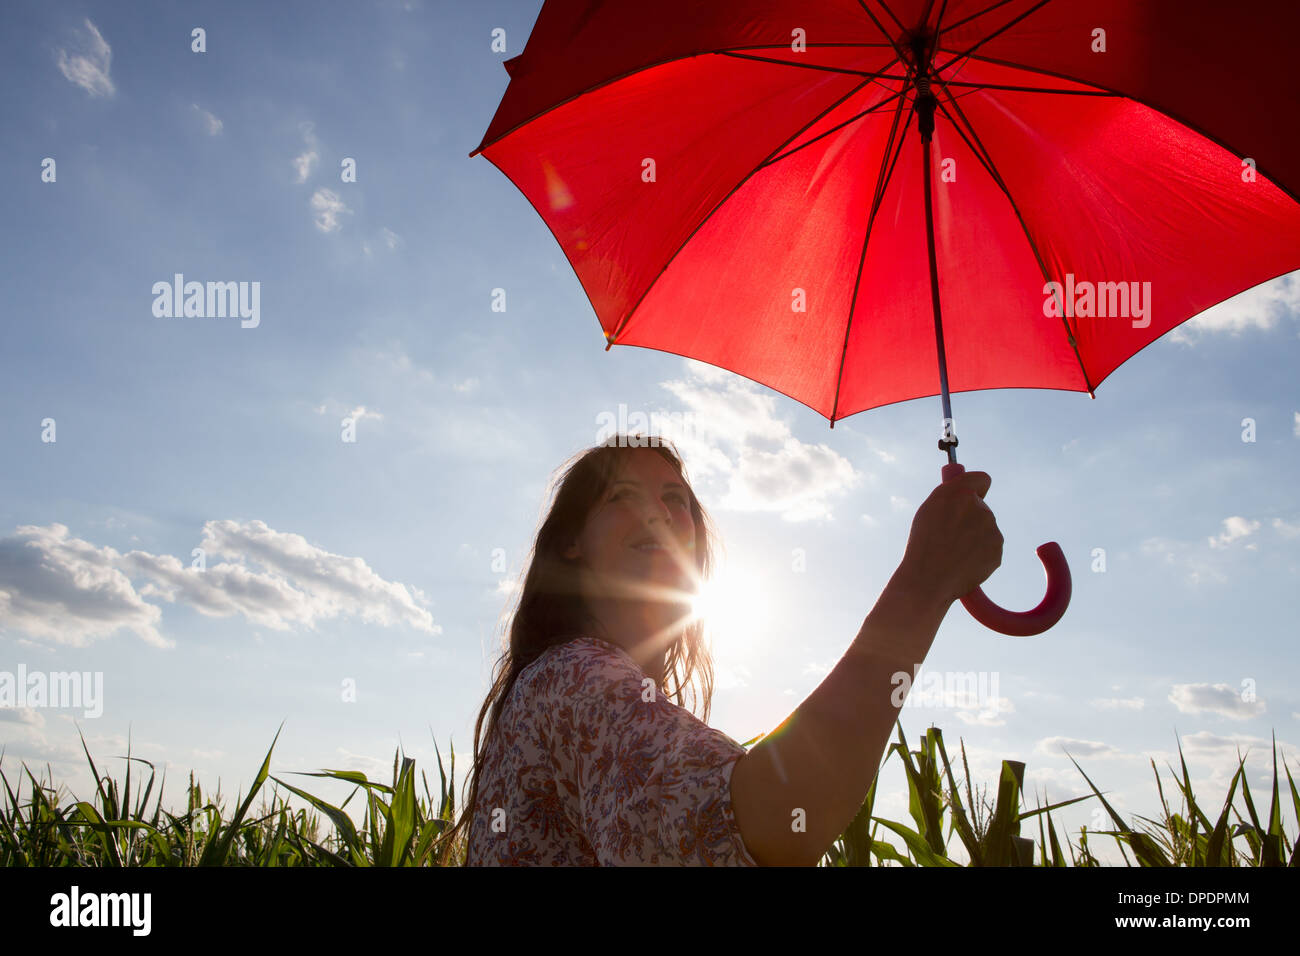 Woman standing holding red umbrella Stock Photo